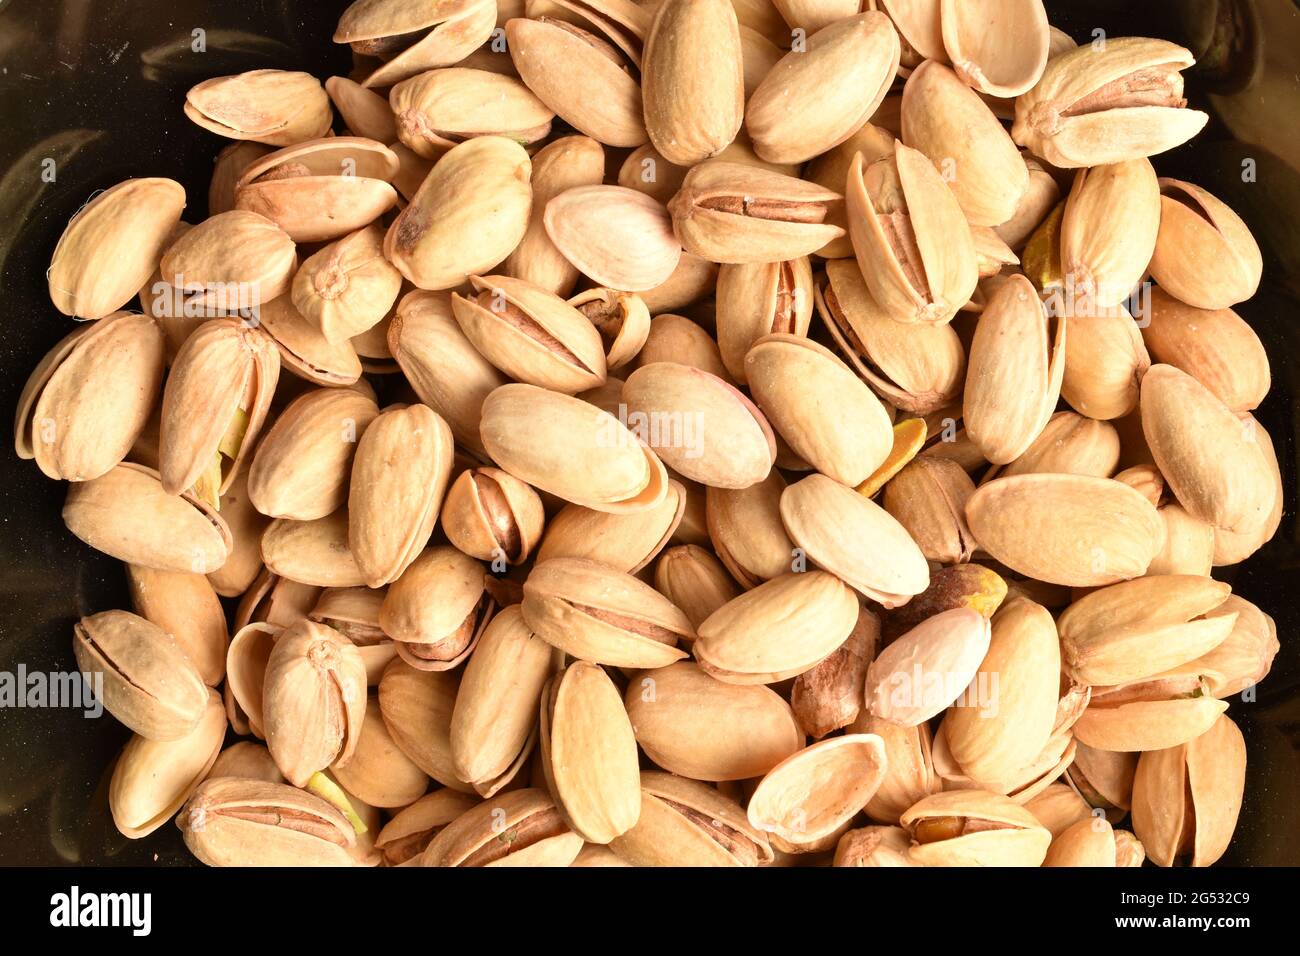 Organic salted delicious pistachios in a black plate, close-up,  top view. Stock Photo